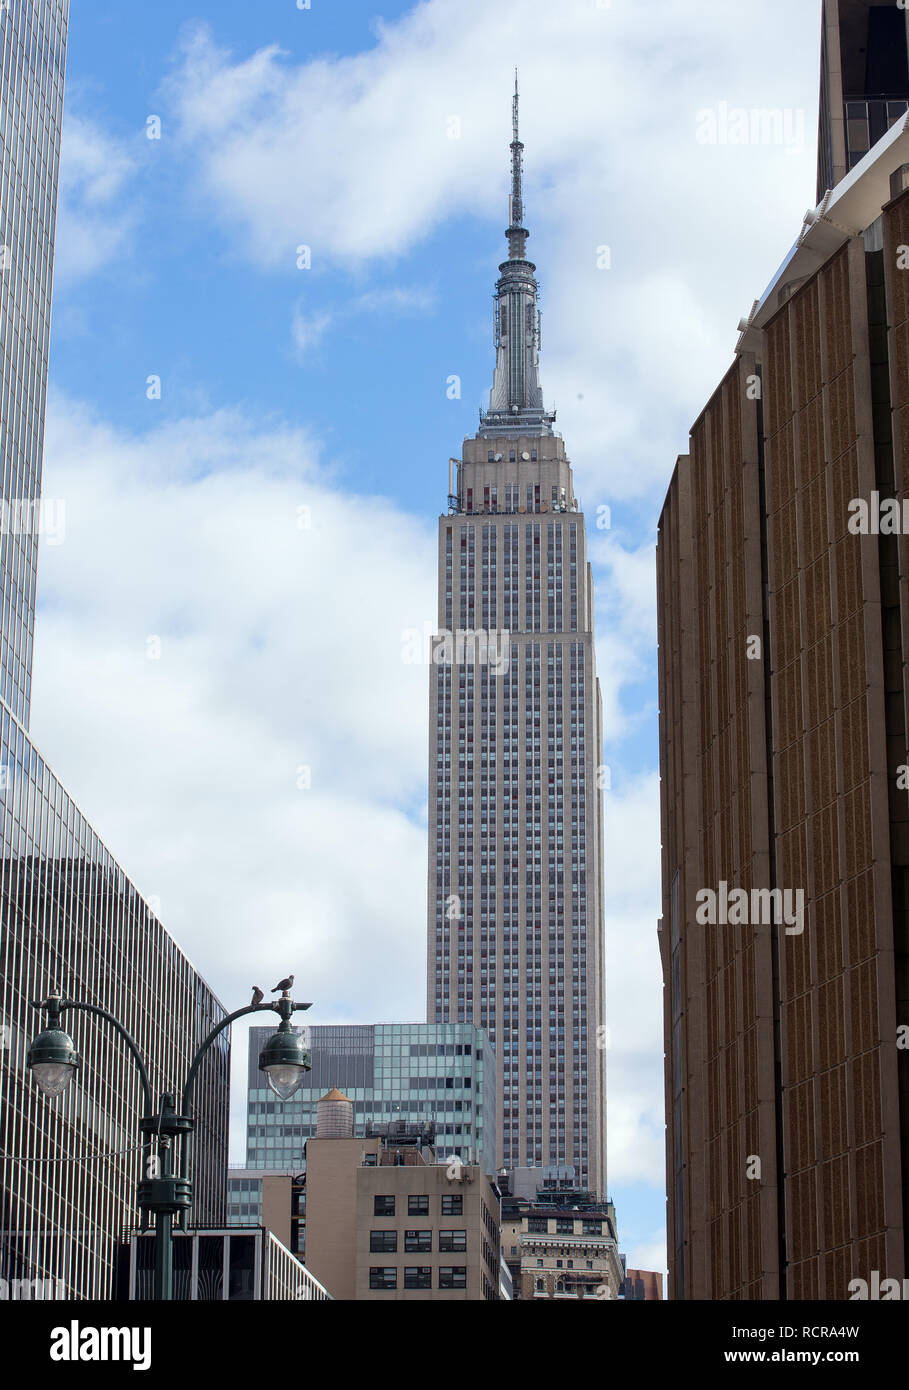 The Empire State Building seen from street level in New York City, NY, USA. Stock Photo